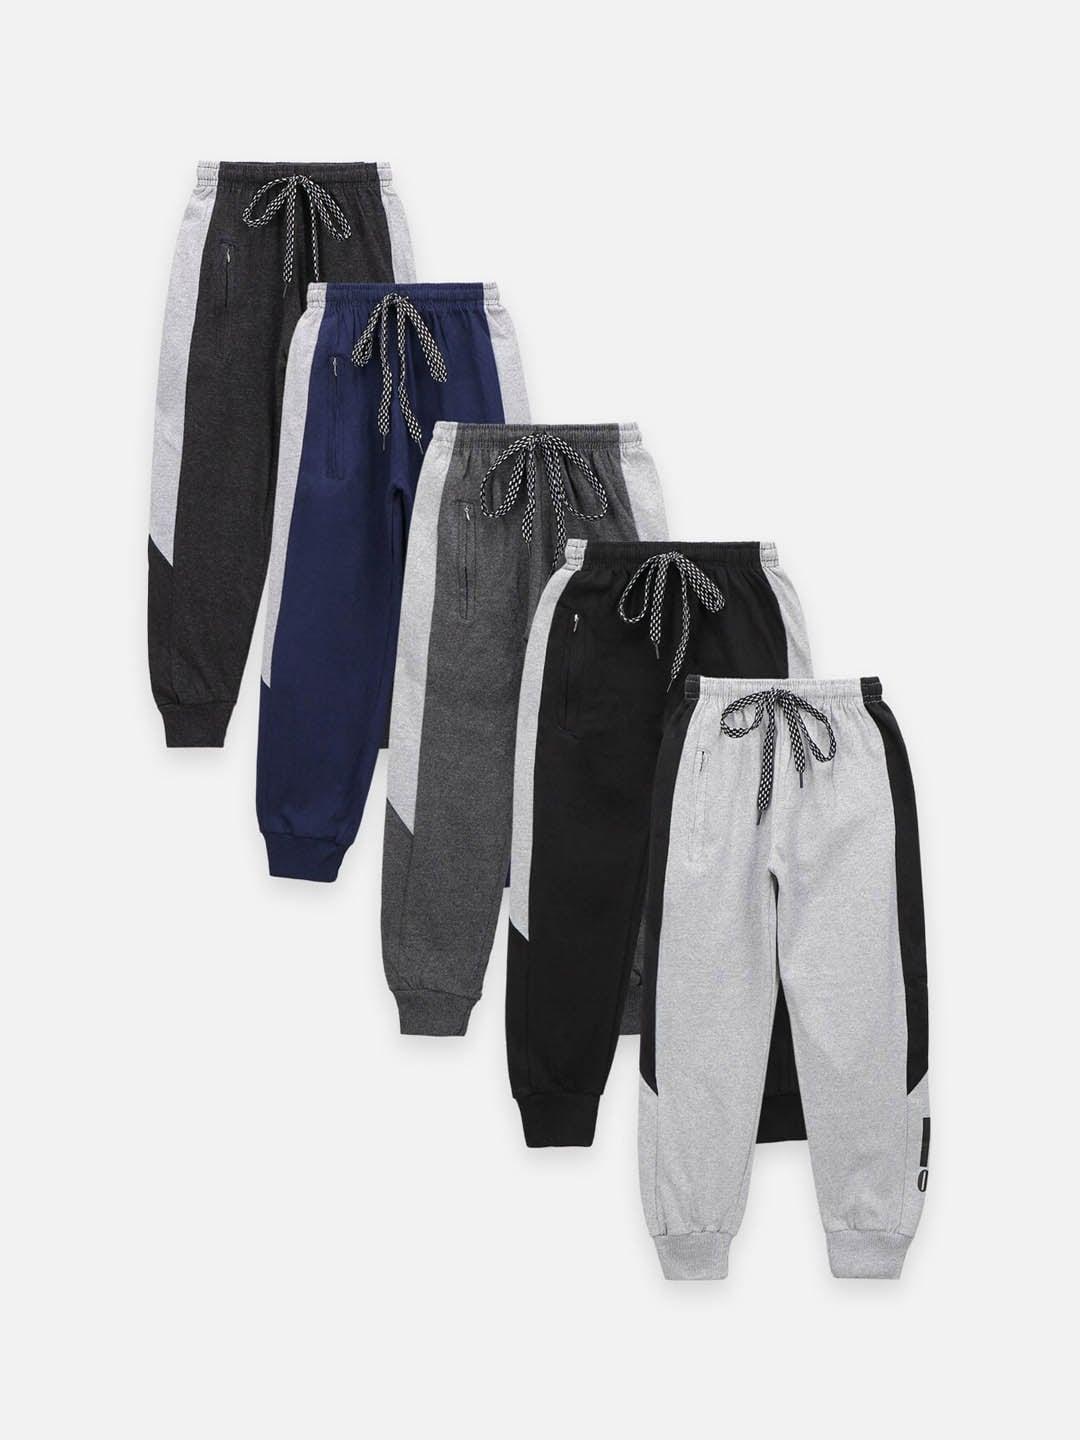 LilPicks Boys Pack Of 5 Solid Cotton Slim-Fit Joggers